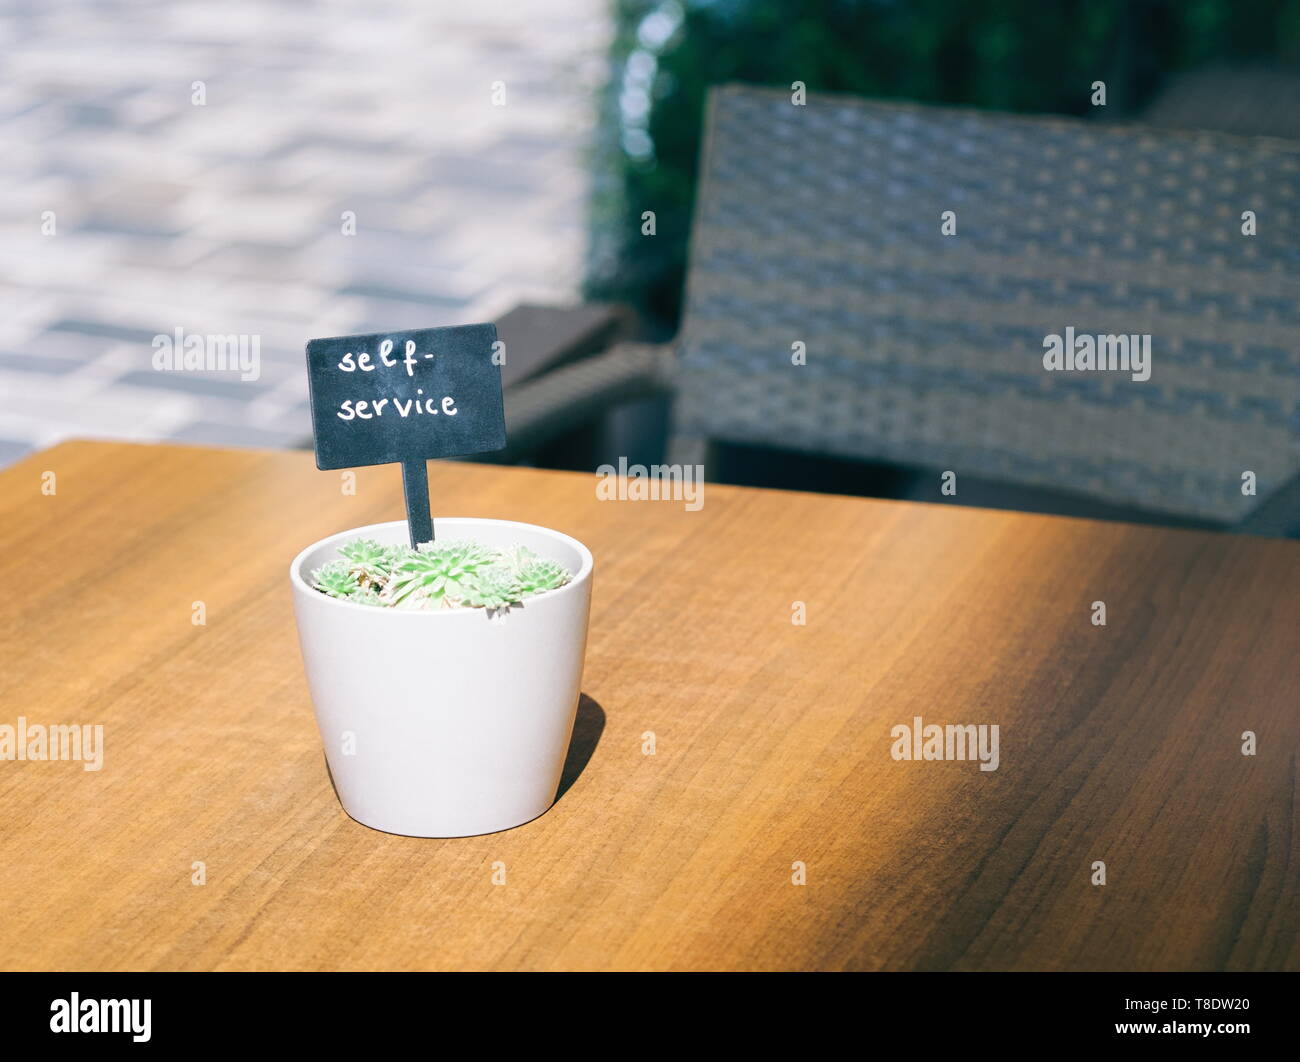 Self Service Sign on Wooden Table Outdoors Stock Photo